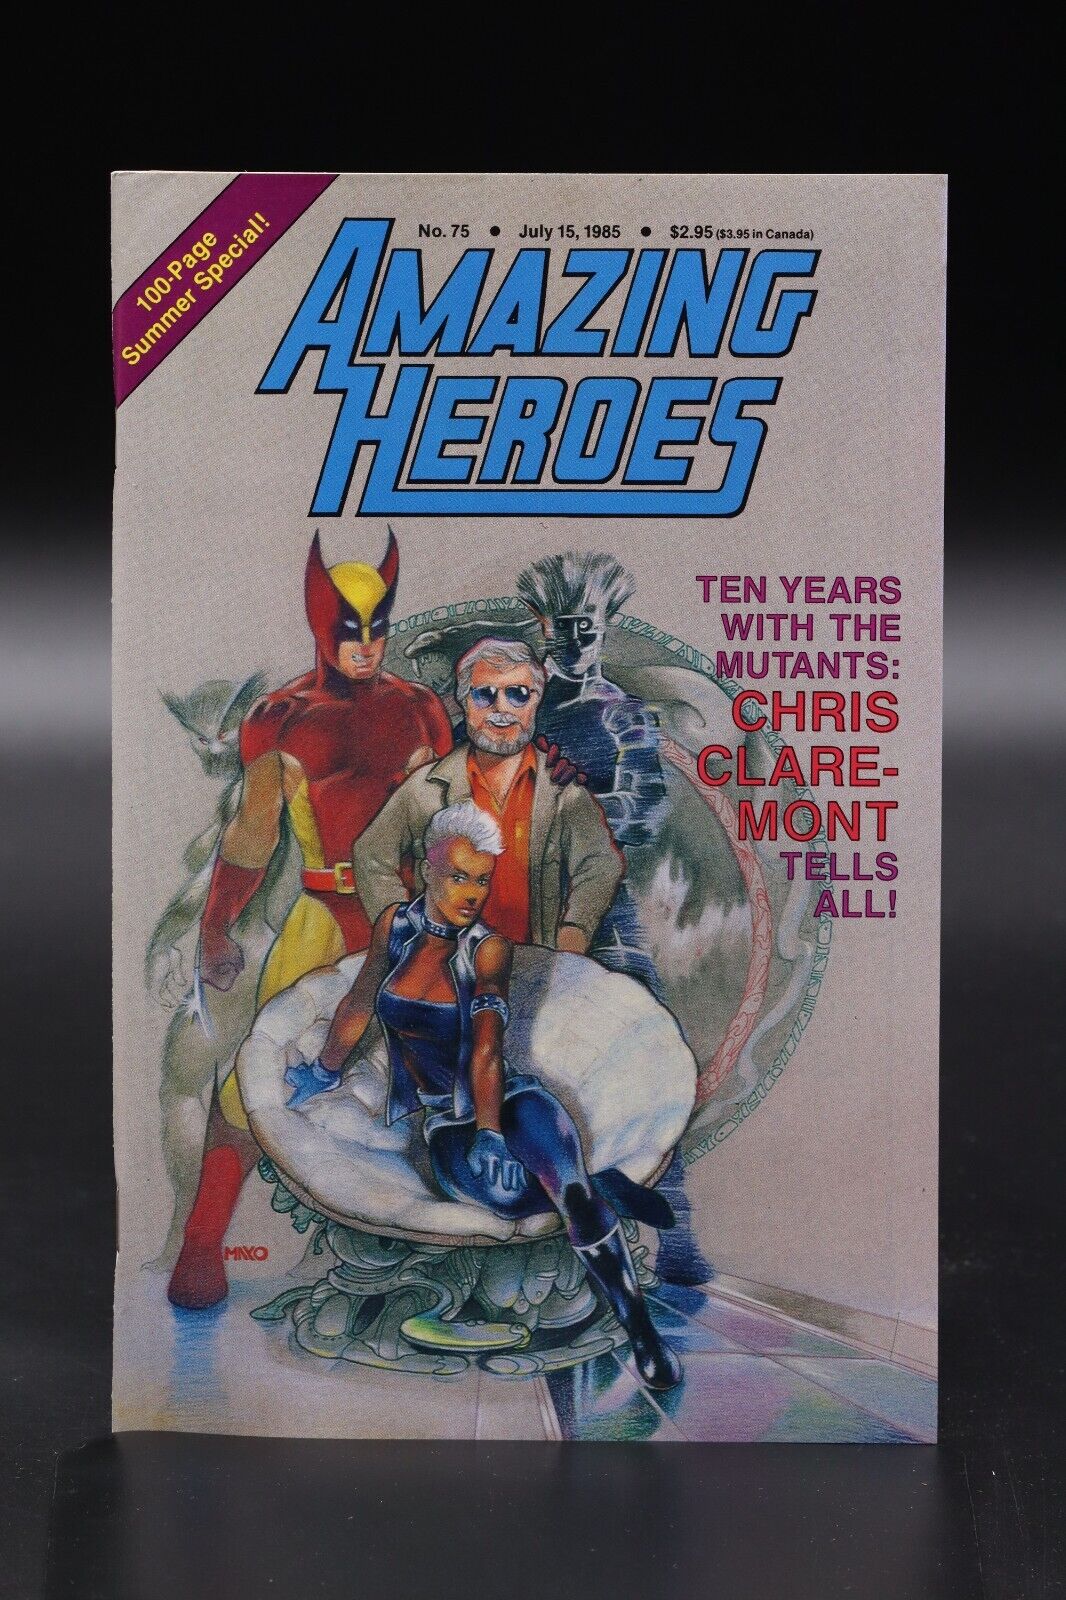 Amazing Heroes (1981) #75 Chris Claremont 10 Years With Mutants Interview NM-